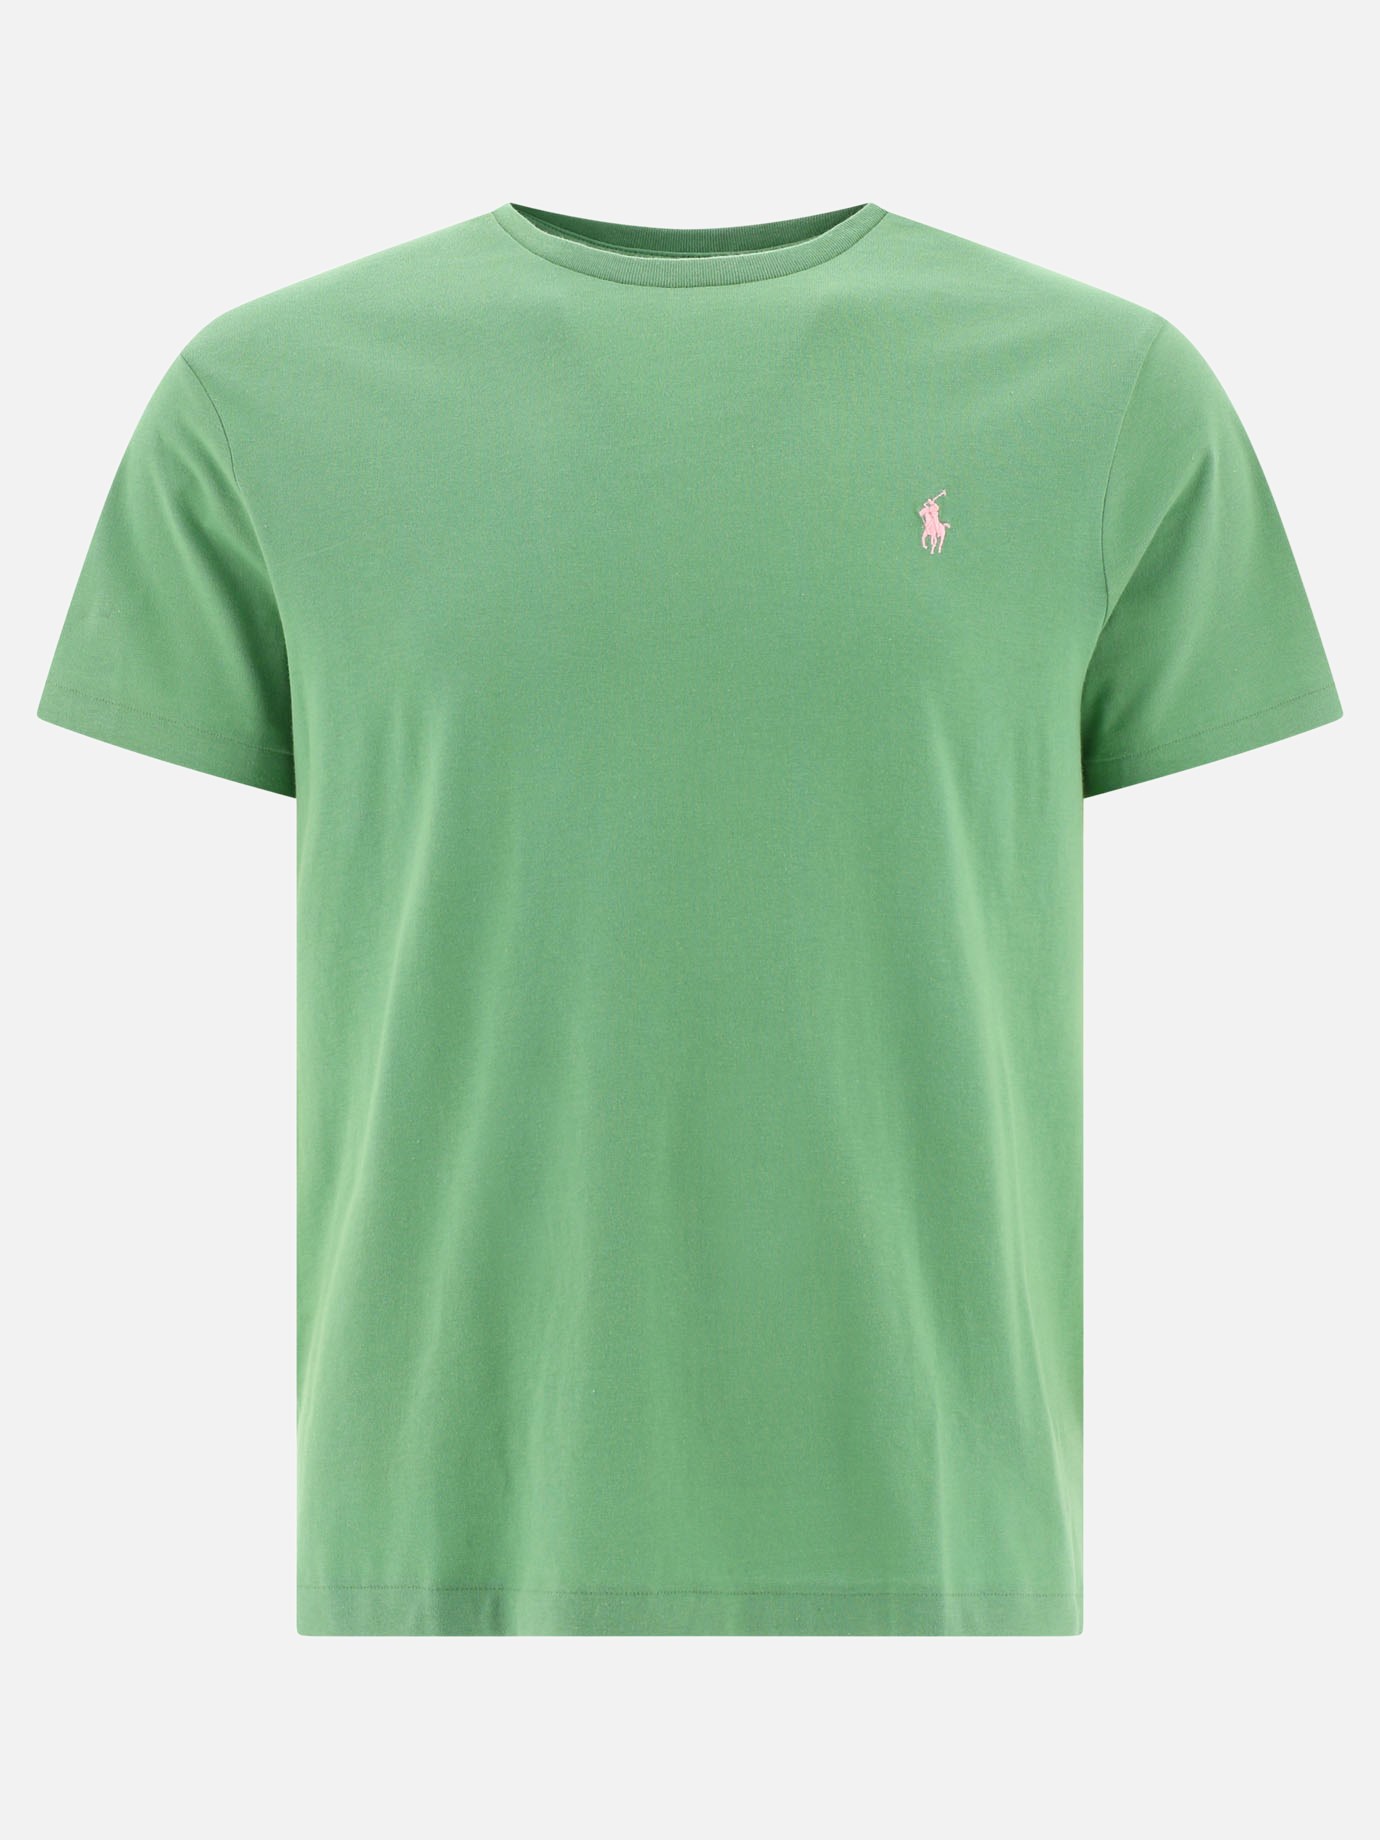 T-shirt  Pony by Polo Ralph Lauren - 4